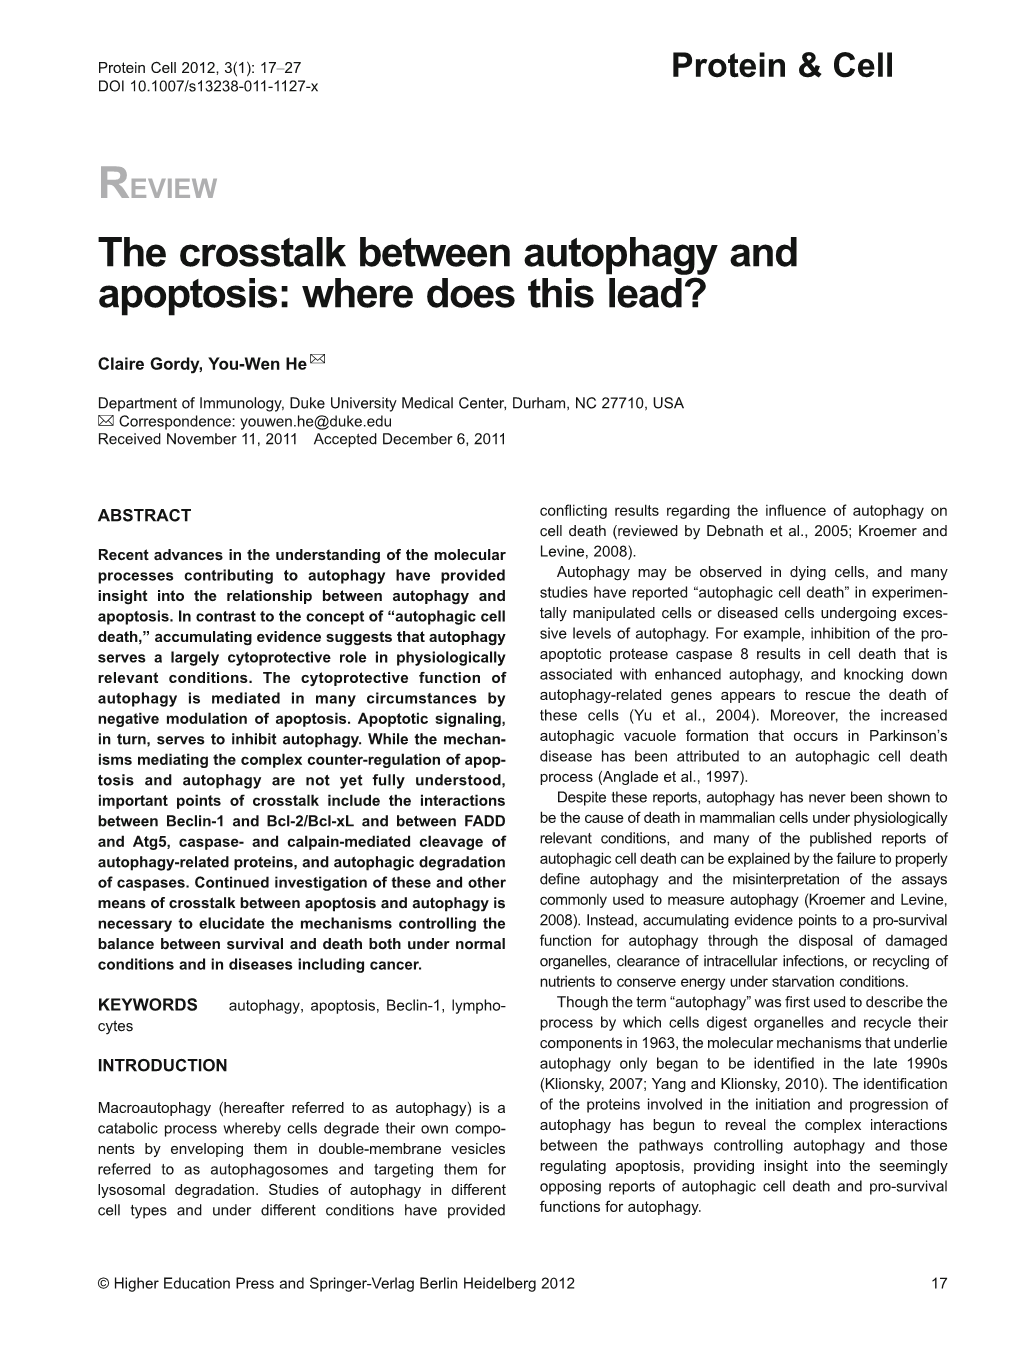 The Crosstalk Between Autophagy and Apoptosis: Where Does This Lead?